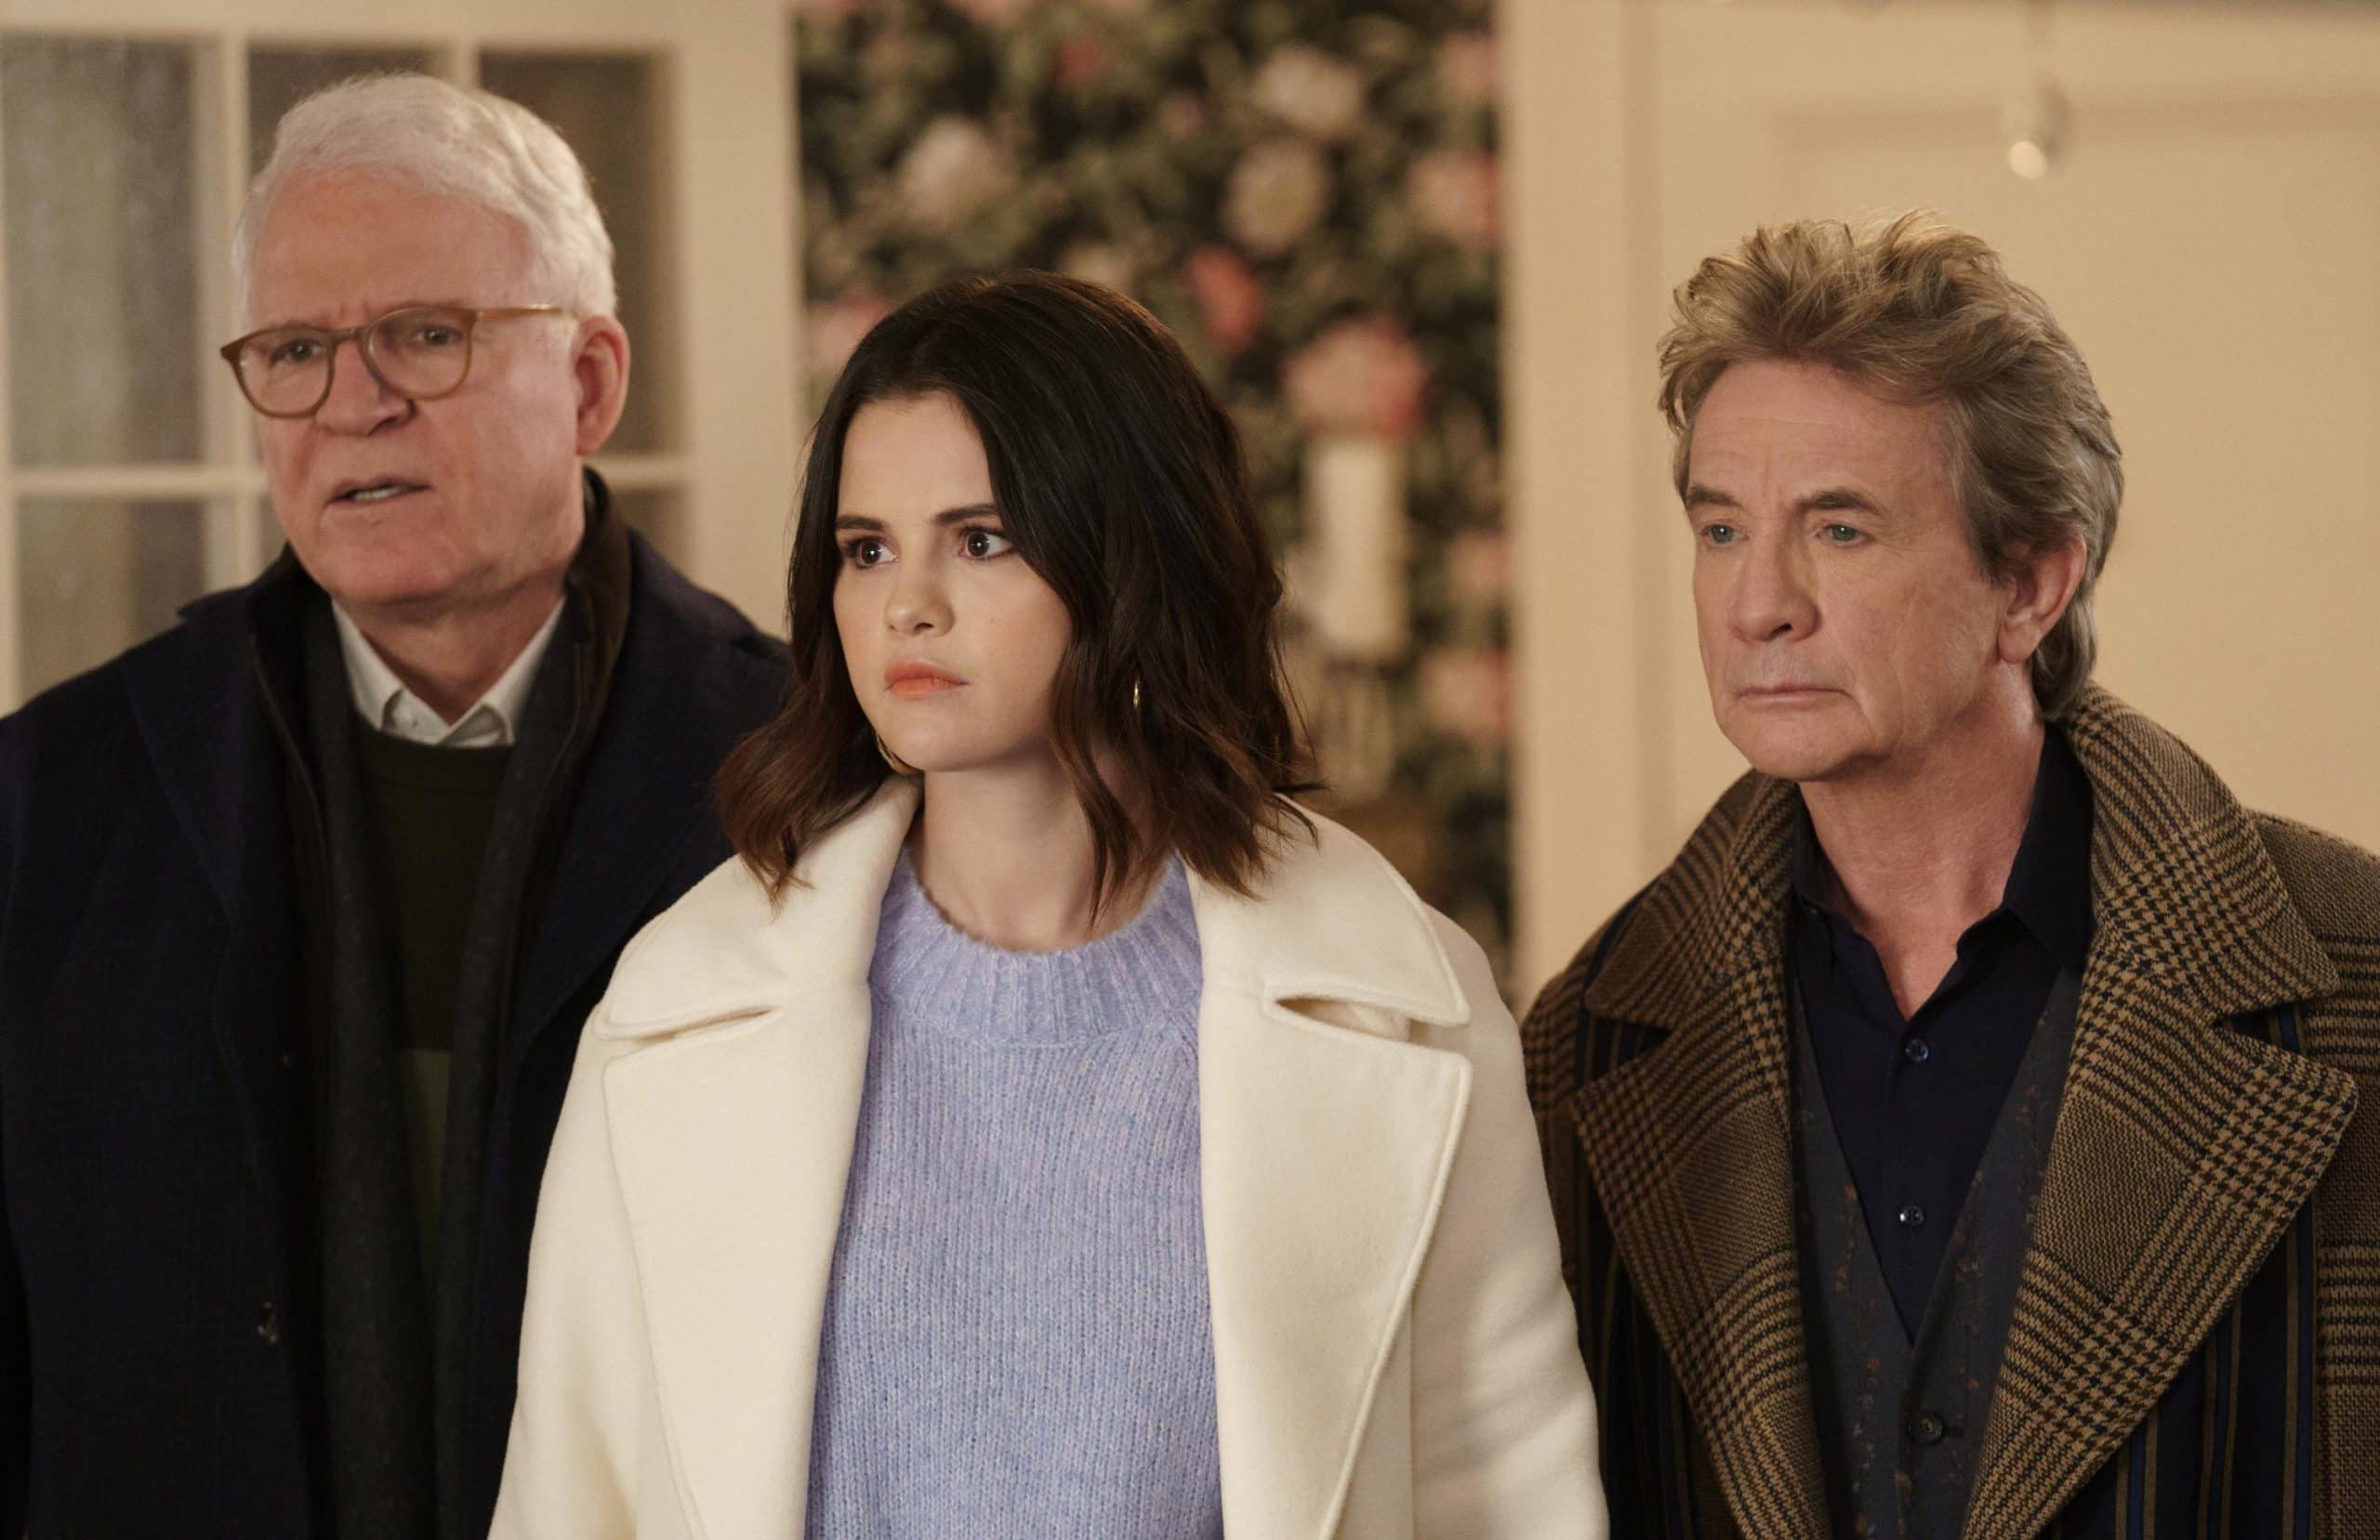 ONLY MURDERS IN THE BUILDING, from left: Selena Gomez, Steve Martin, Martin Short, Performance Review'